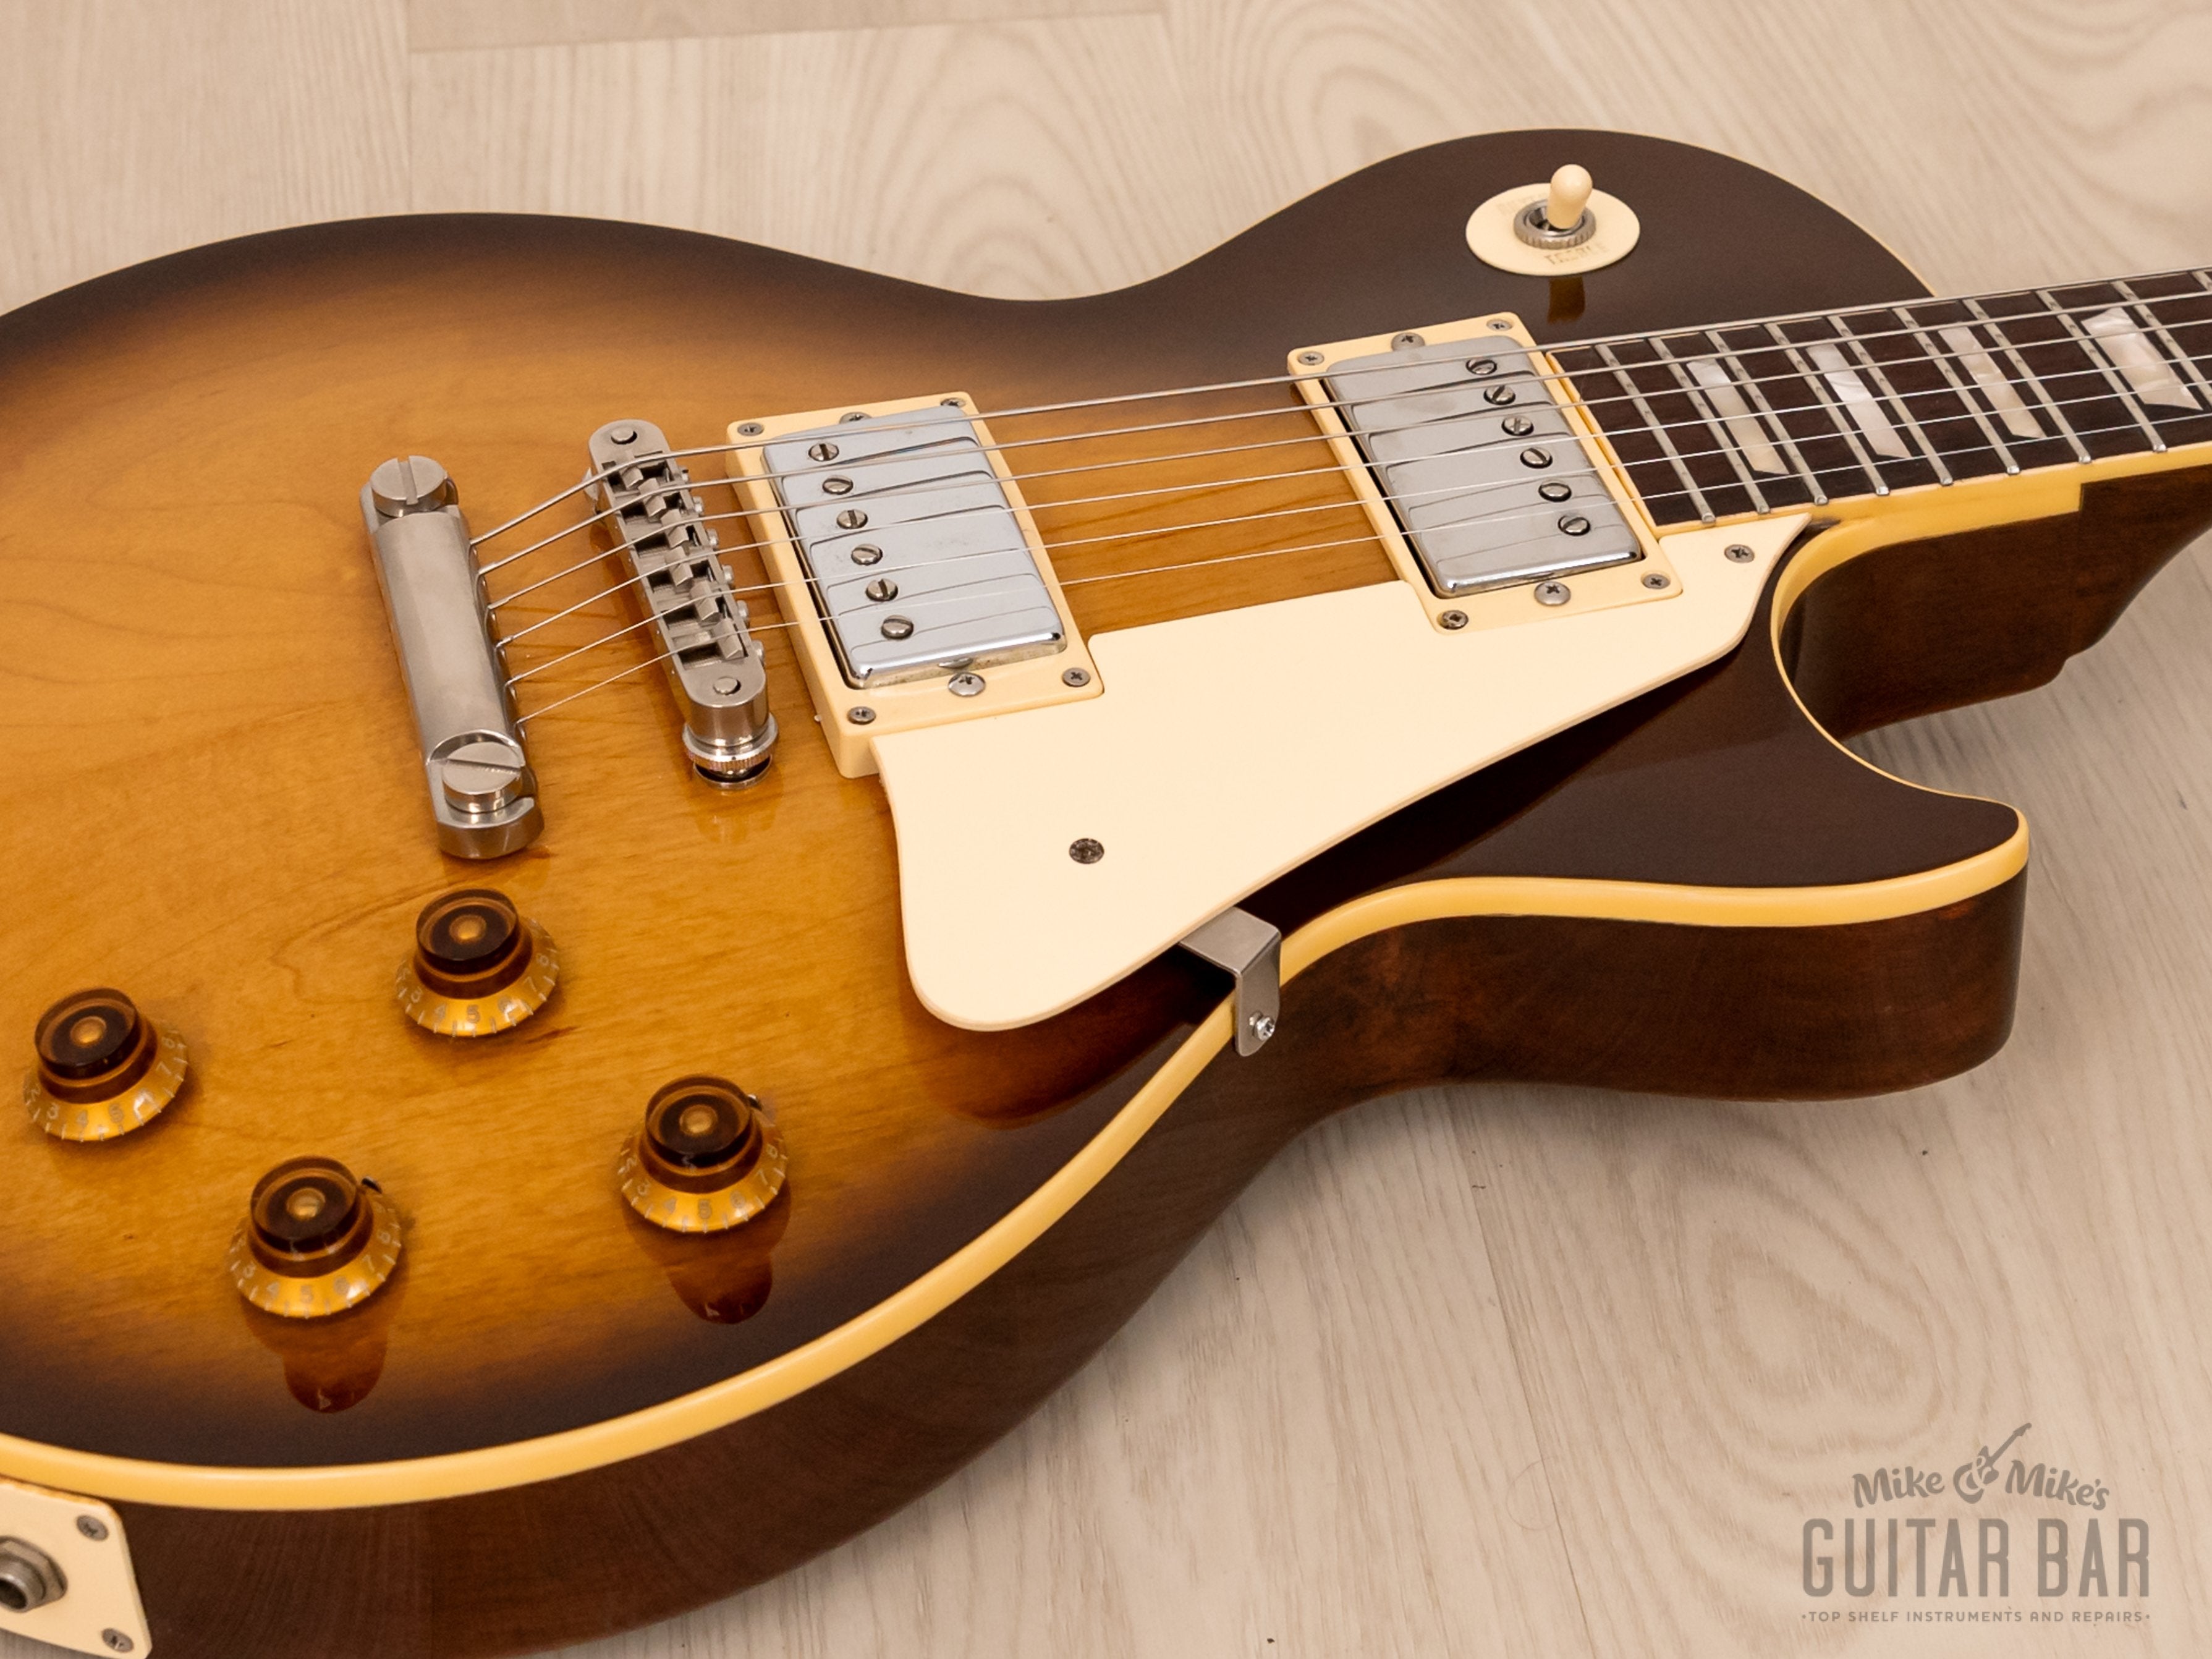 1989 Orville by Gibson Les Paul Standard LPS Vintage Sunburst w/ USA Bill Lawrence Humbuckers